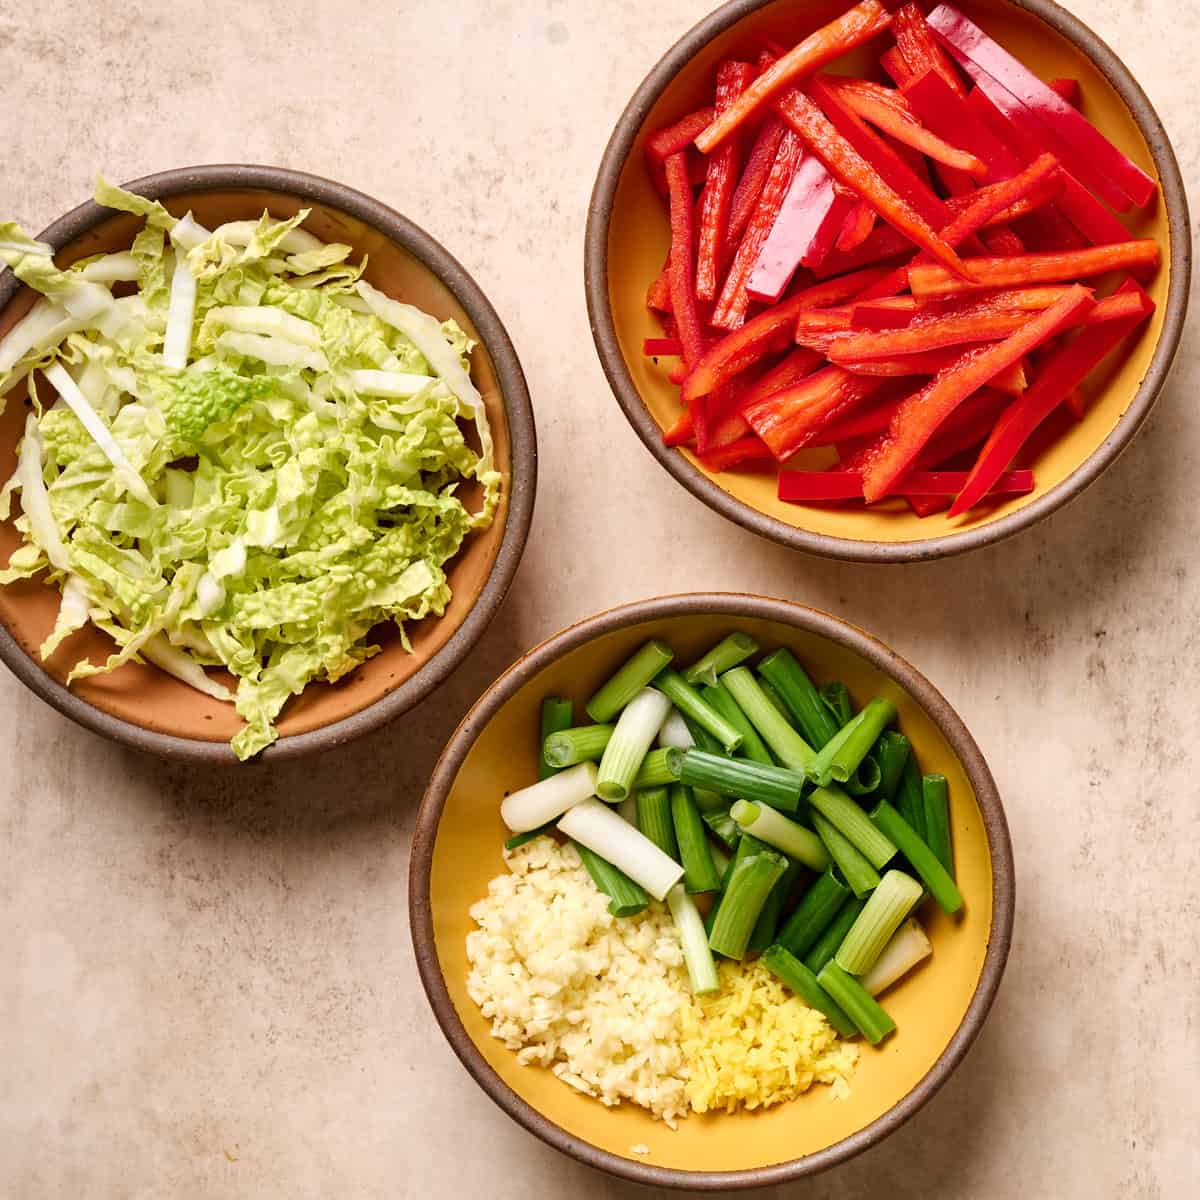 Sliced vegetables and aromatics in three small bowls on a tan table.